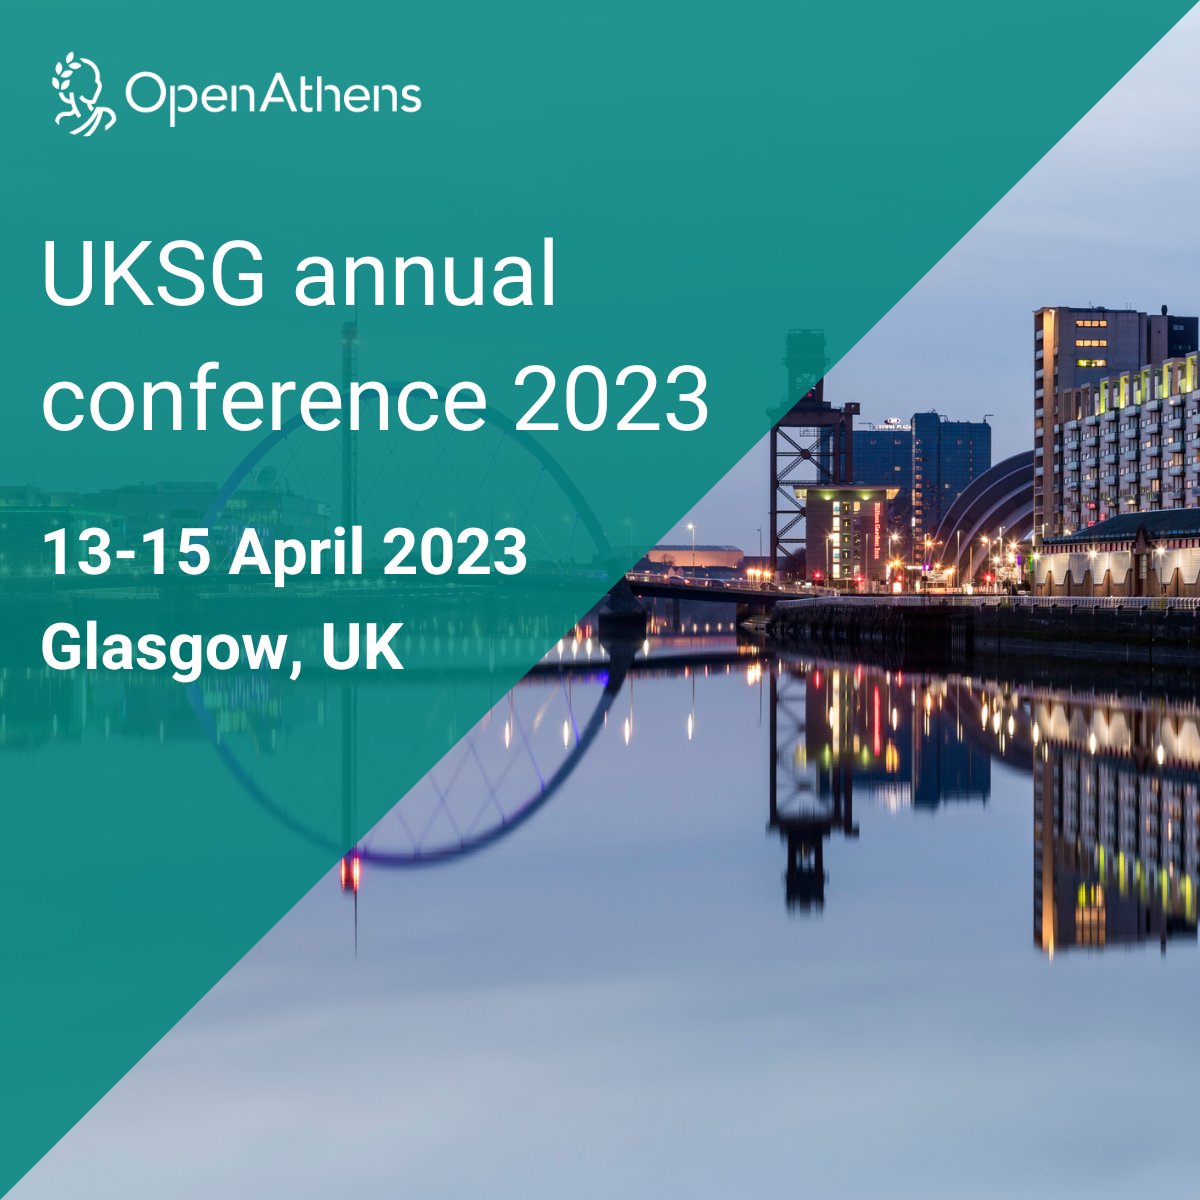 The @UKSG annual conference 2023 starts today! Stop and say hello to Robert Scaysbrook, our Head of international sales and partnerships, who will also be speaking at the event!

Find out more about this year's program: https://t.co/E8aFVbfGaA

#UKSG2023 https://t.co/MXb138A7R0